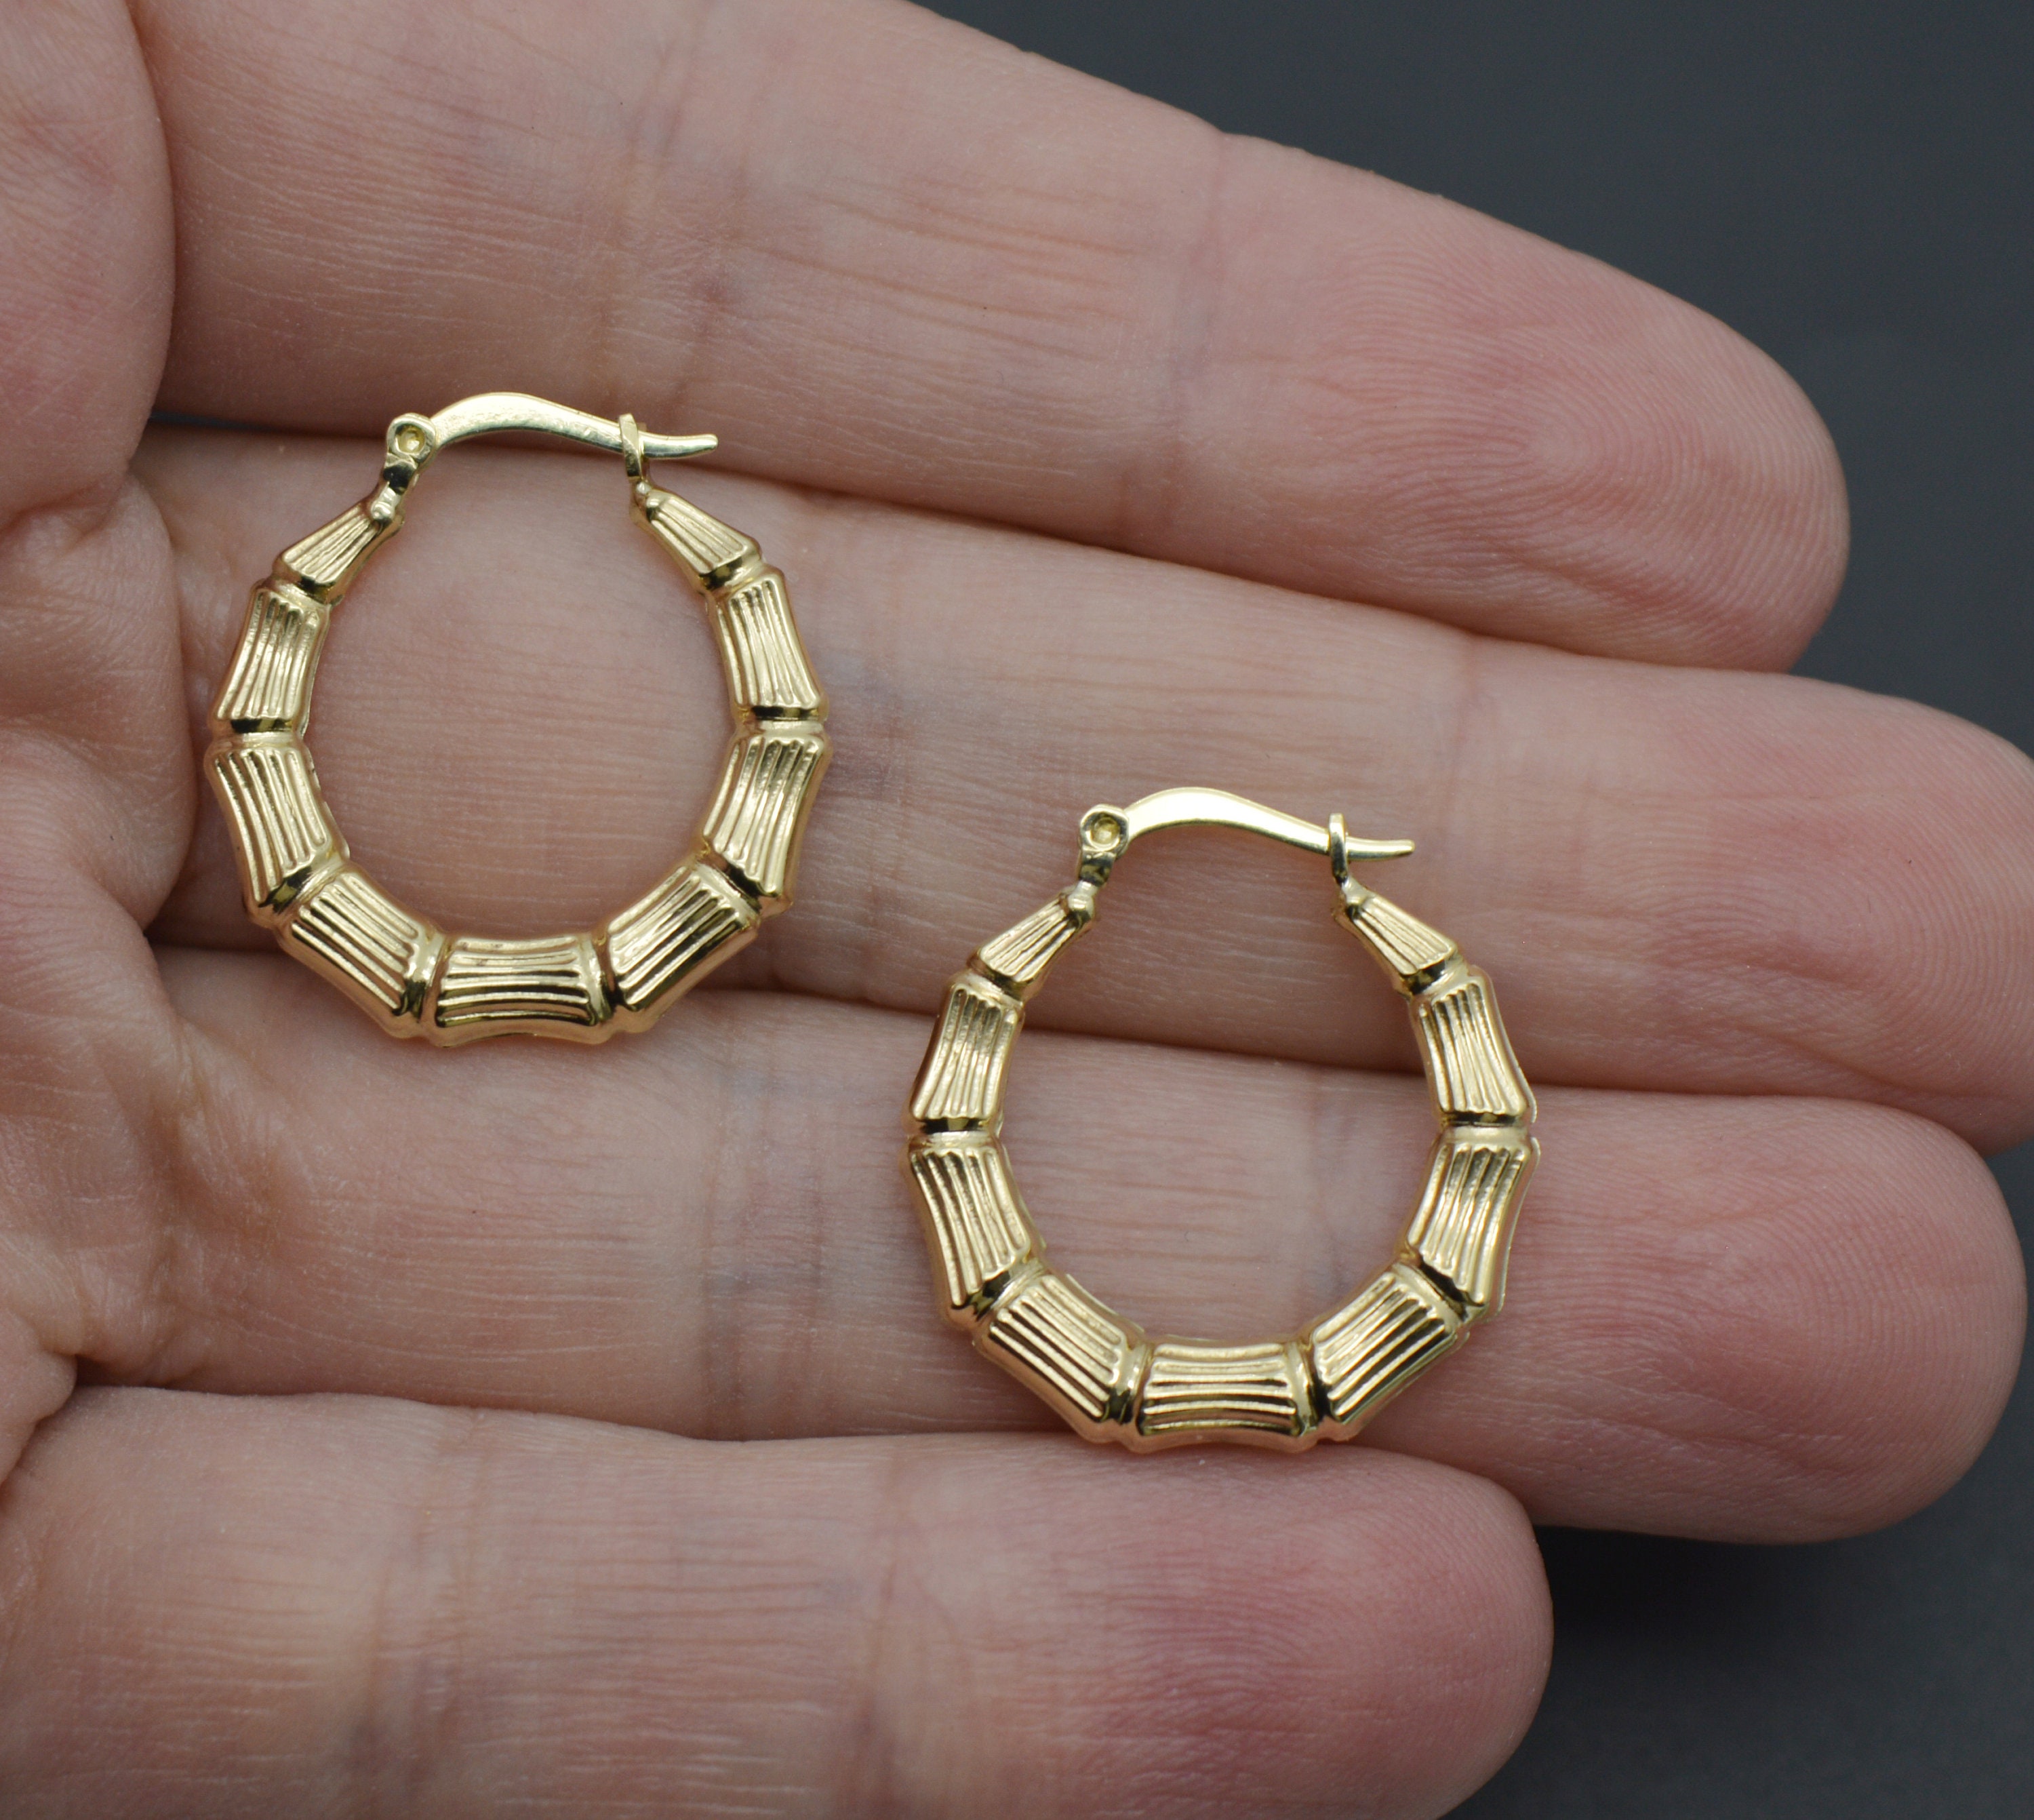 Buy 10k Yellow Gold Hollow Small Bamboo Hoops Online at SO ICY JEWELRY